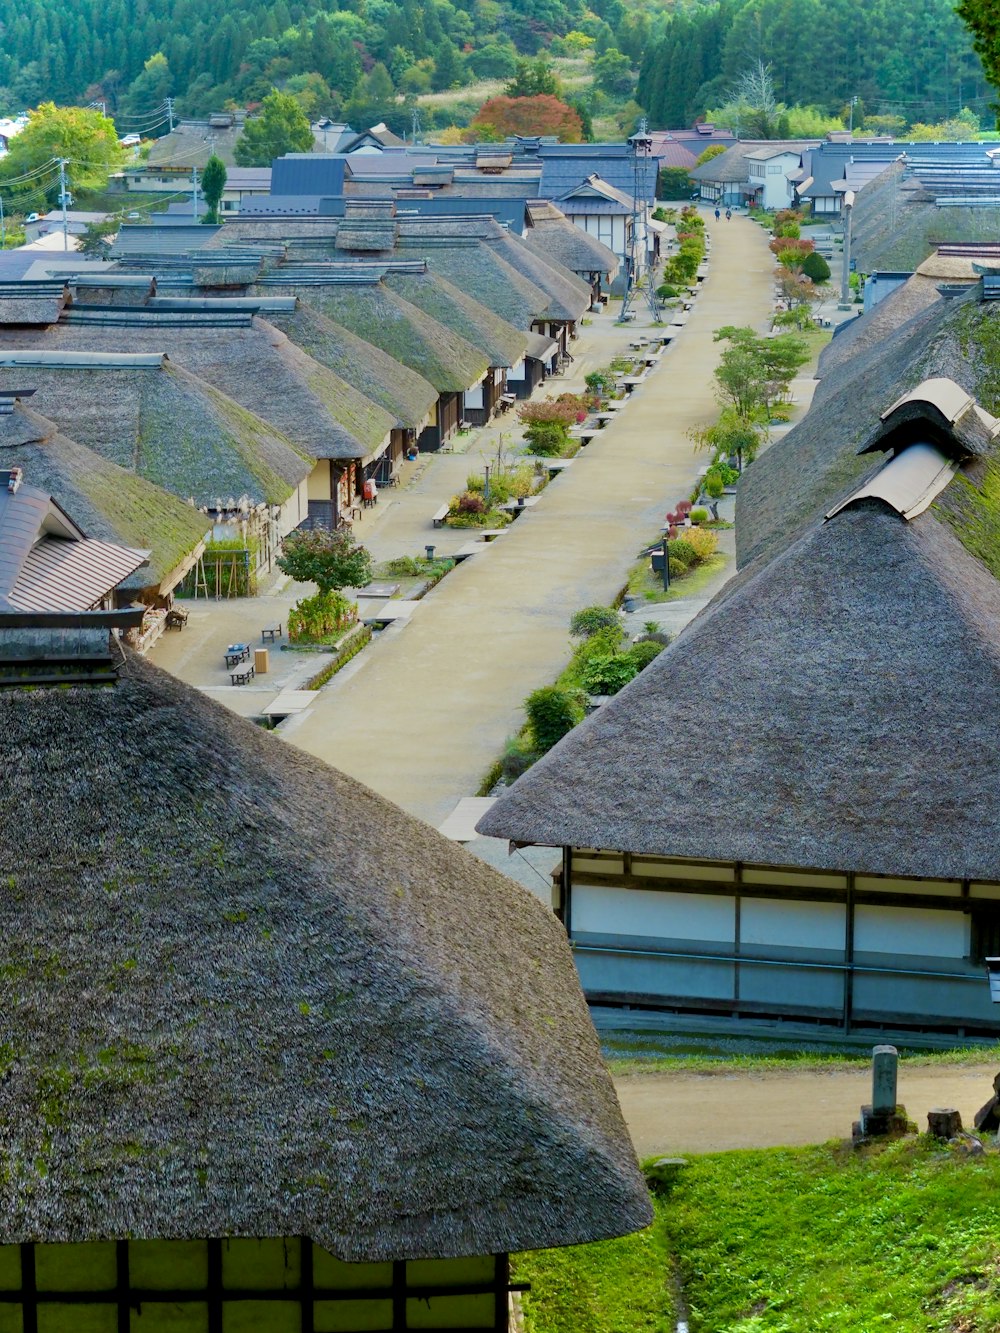 a row of houses with thatched roofs in a village